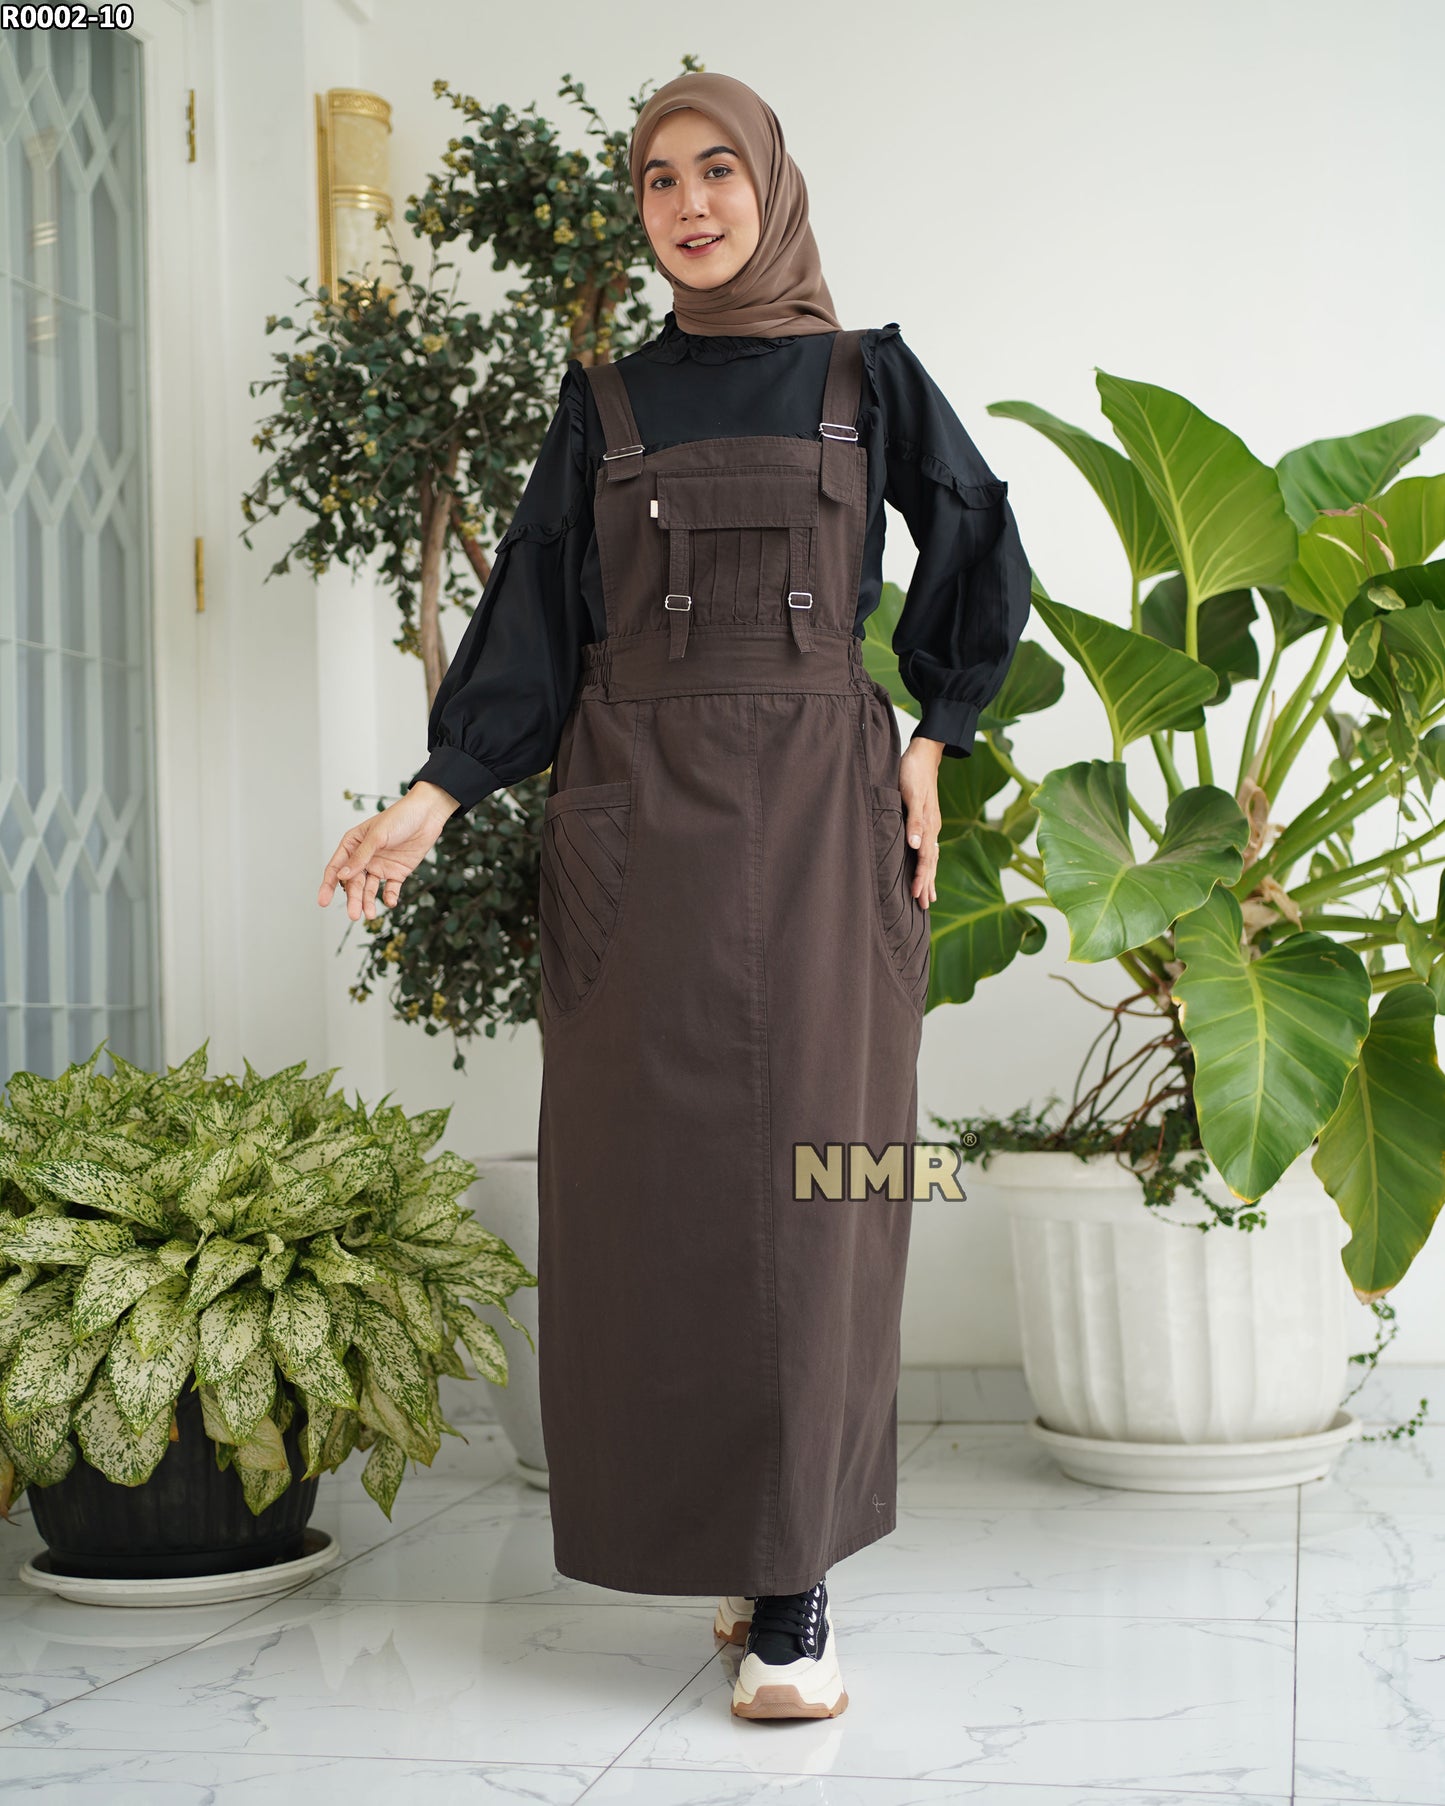 NMR Gamis Jumpsuit Overall Baby Canvas Vol R002-10